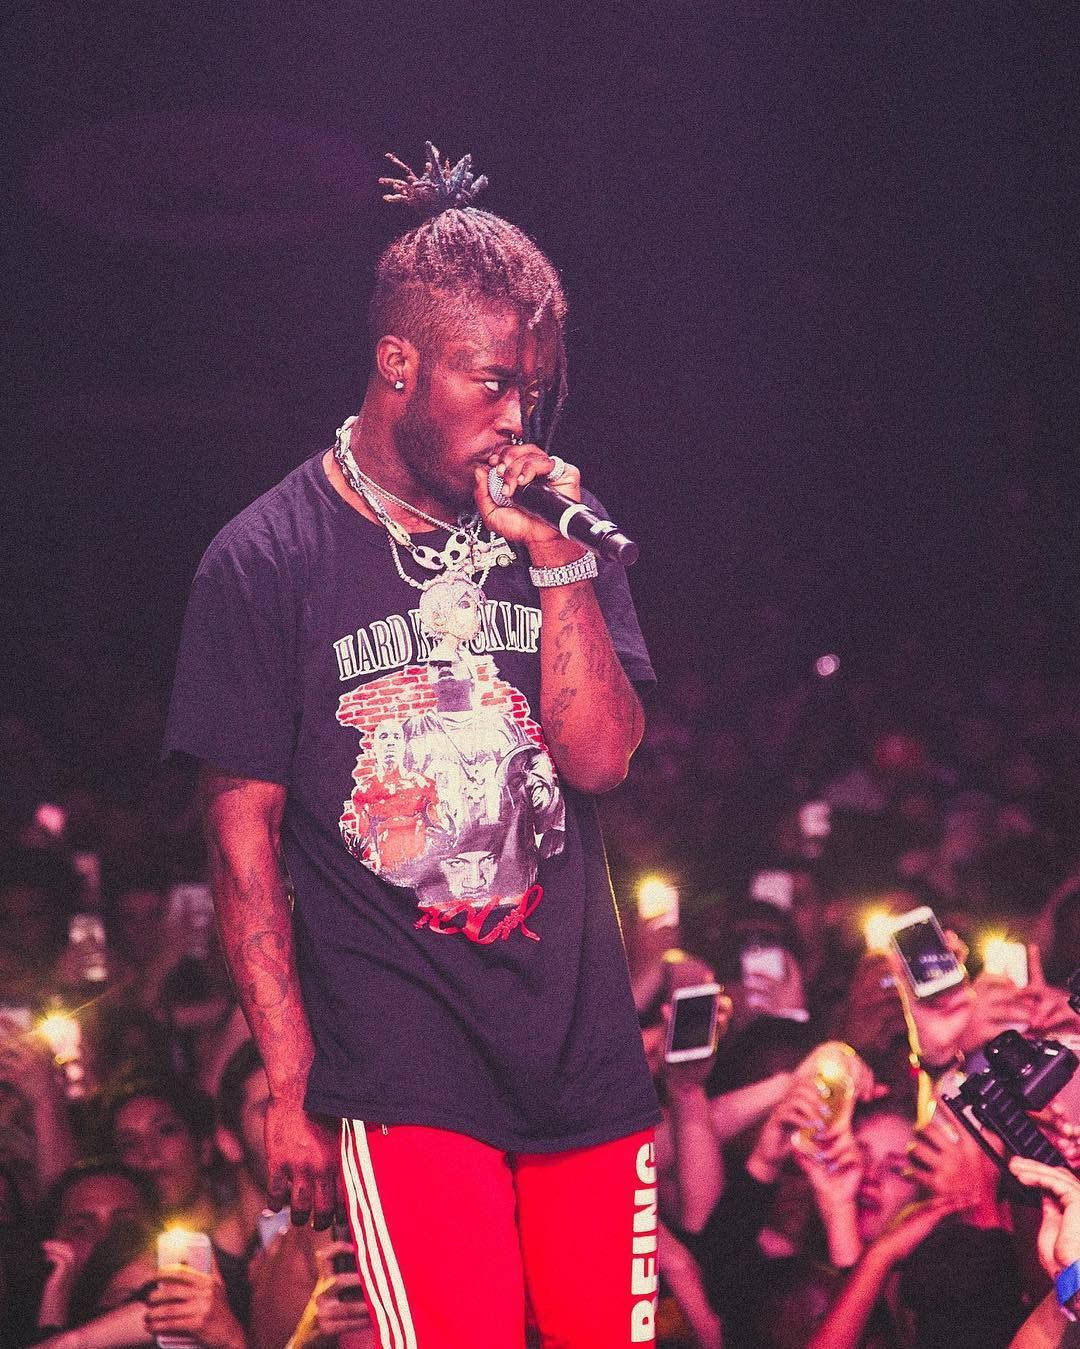 Lil Uzi Vert on the Stage at a Concert Wallpaper